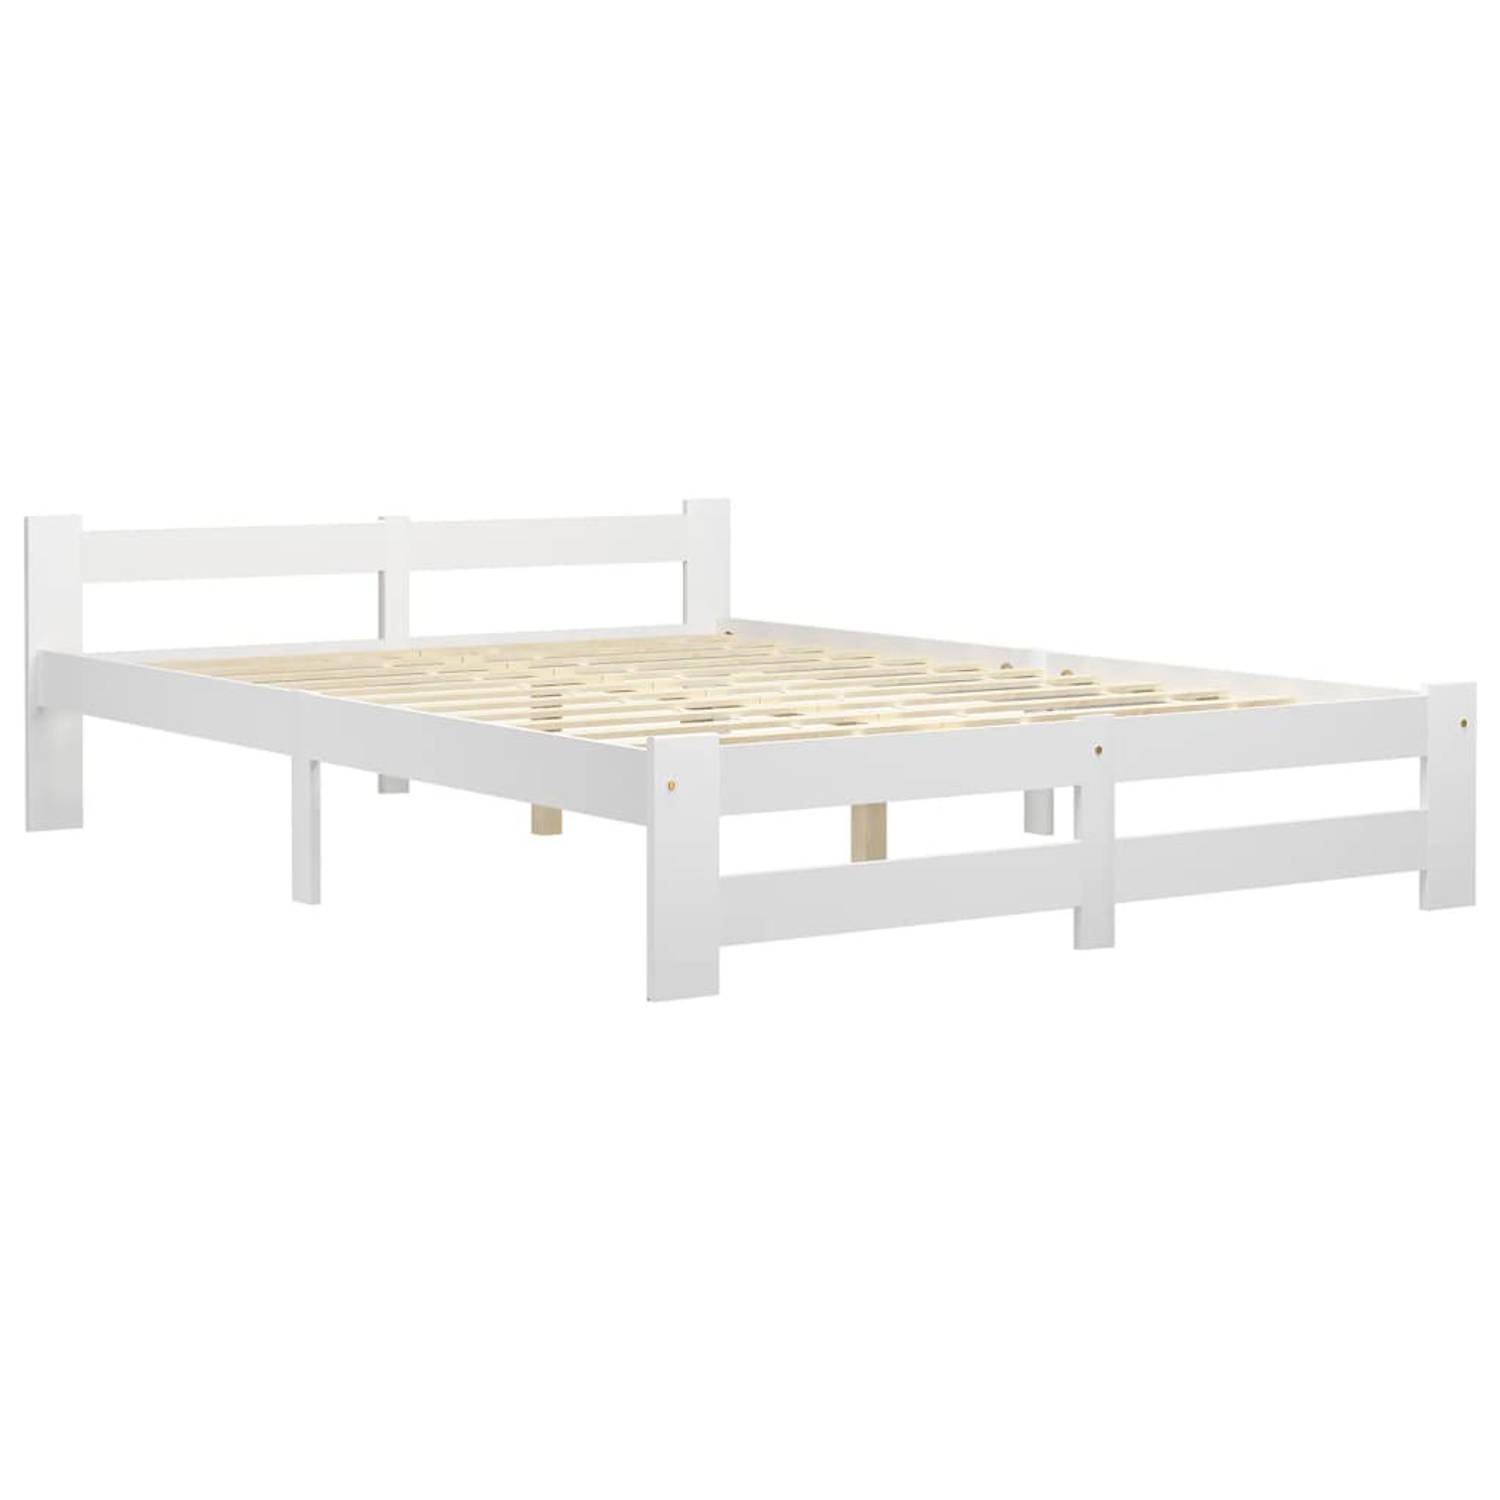 The Living Store Bedframe massief grenenhout wit 160x200 cm - Bedframe - Bedframes - Bed Frame - Bed Frames - Bed - Bedden - Houten Bedframe - Houten Bedframes - 2-persoonsbed - 2